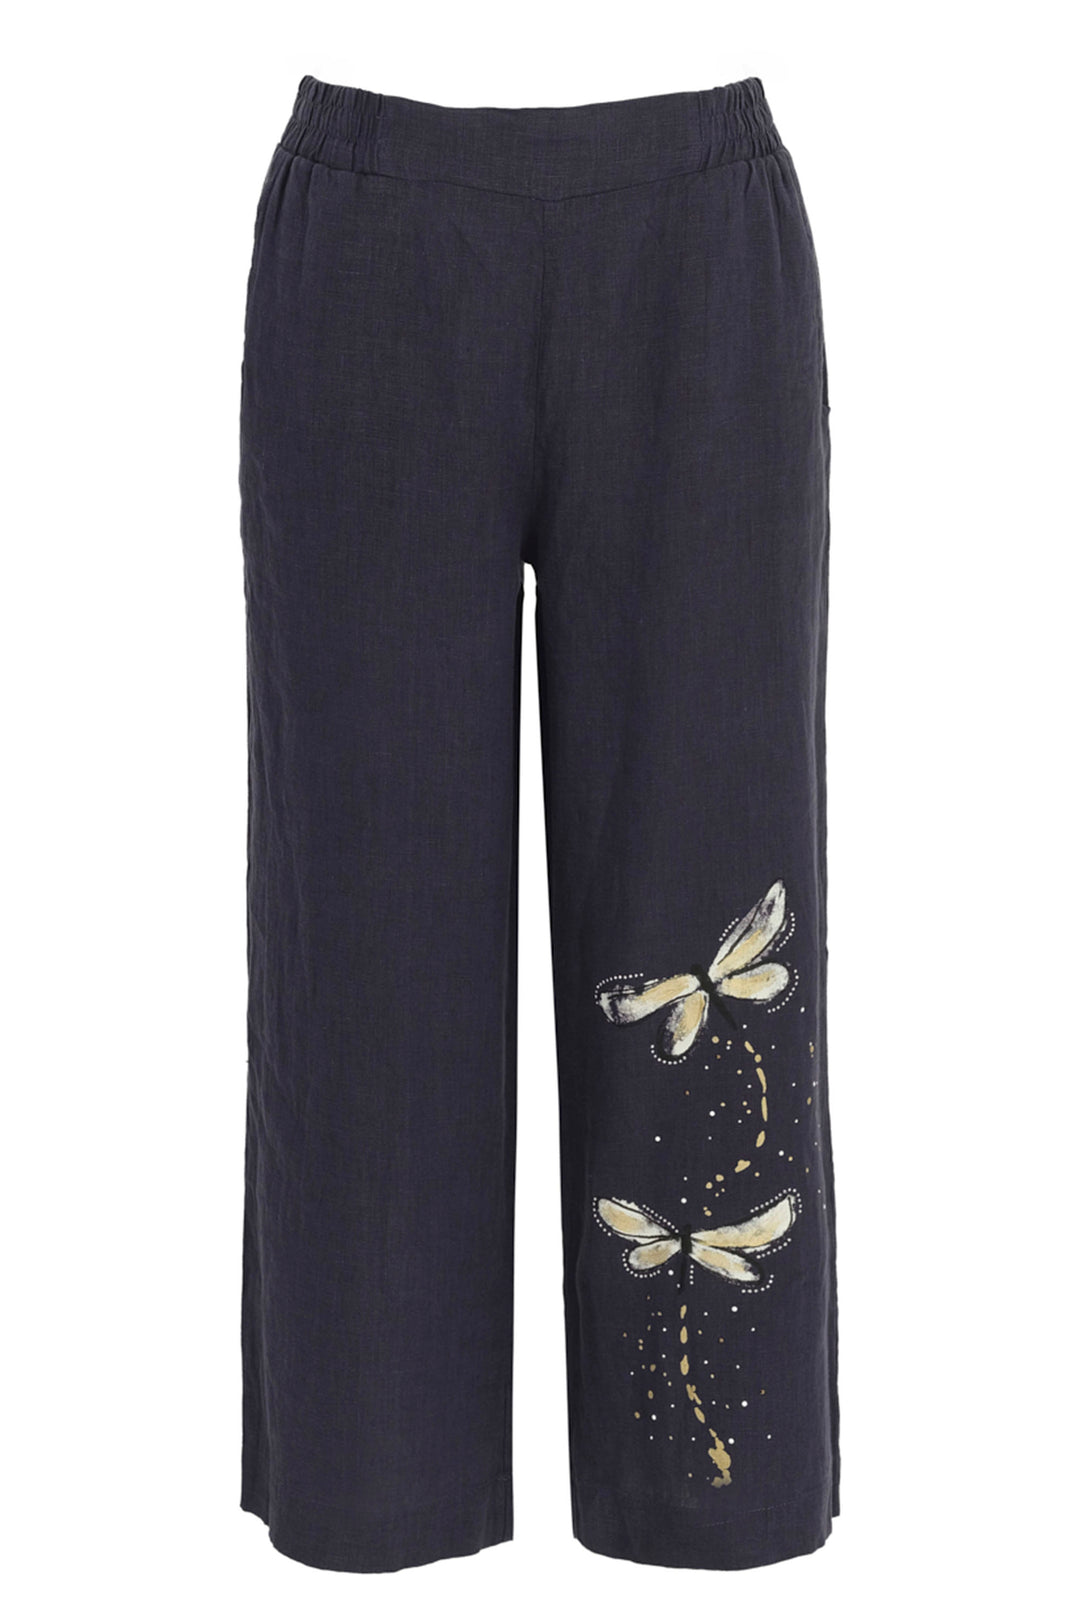 Dolcezza Summer 2024 These all linen pants feature dragonflies and an elastic waist to keep it casual and simple. Perfect for pairing with a basic tee or tank top. Elevate your style with these dark navy crop pants!